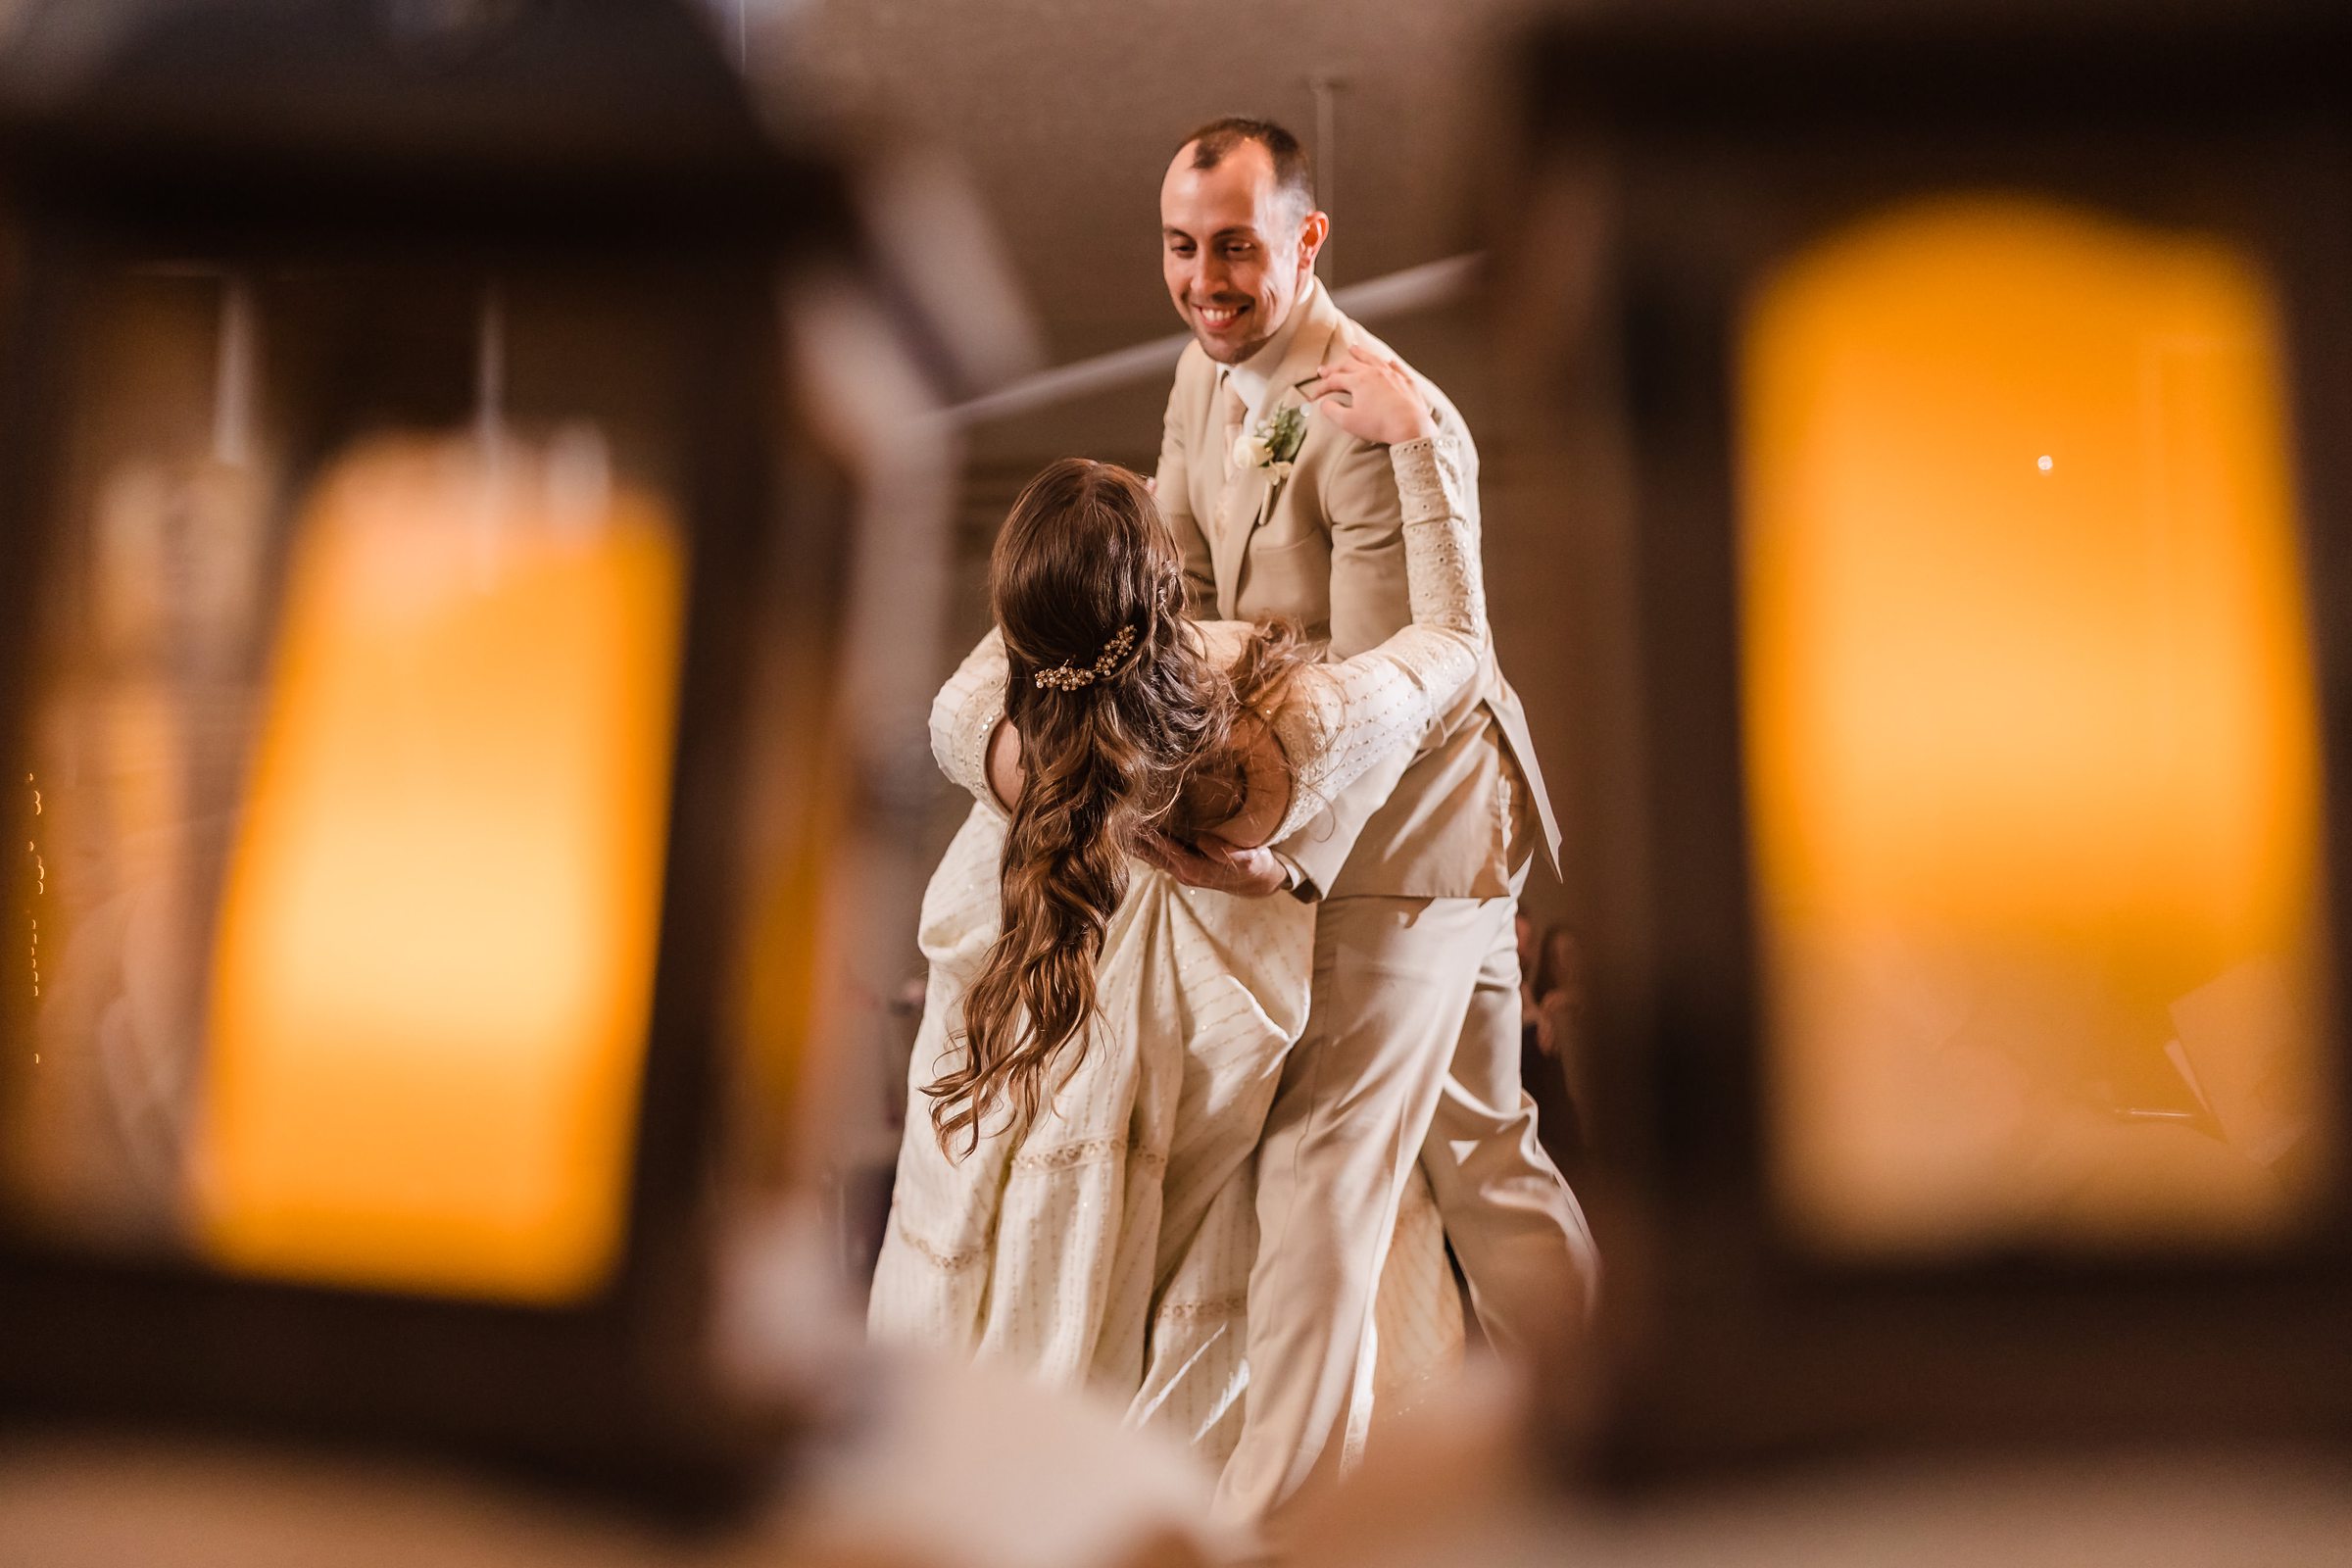 Bride and groom share their first dance during their wedding in Bloomington-Normal, Illinois.